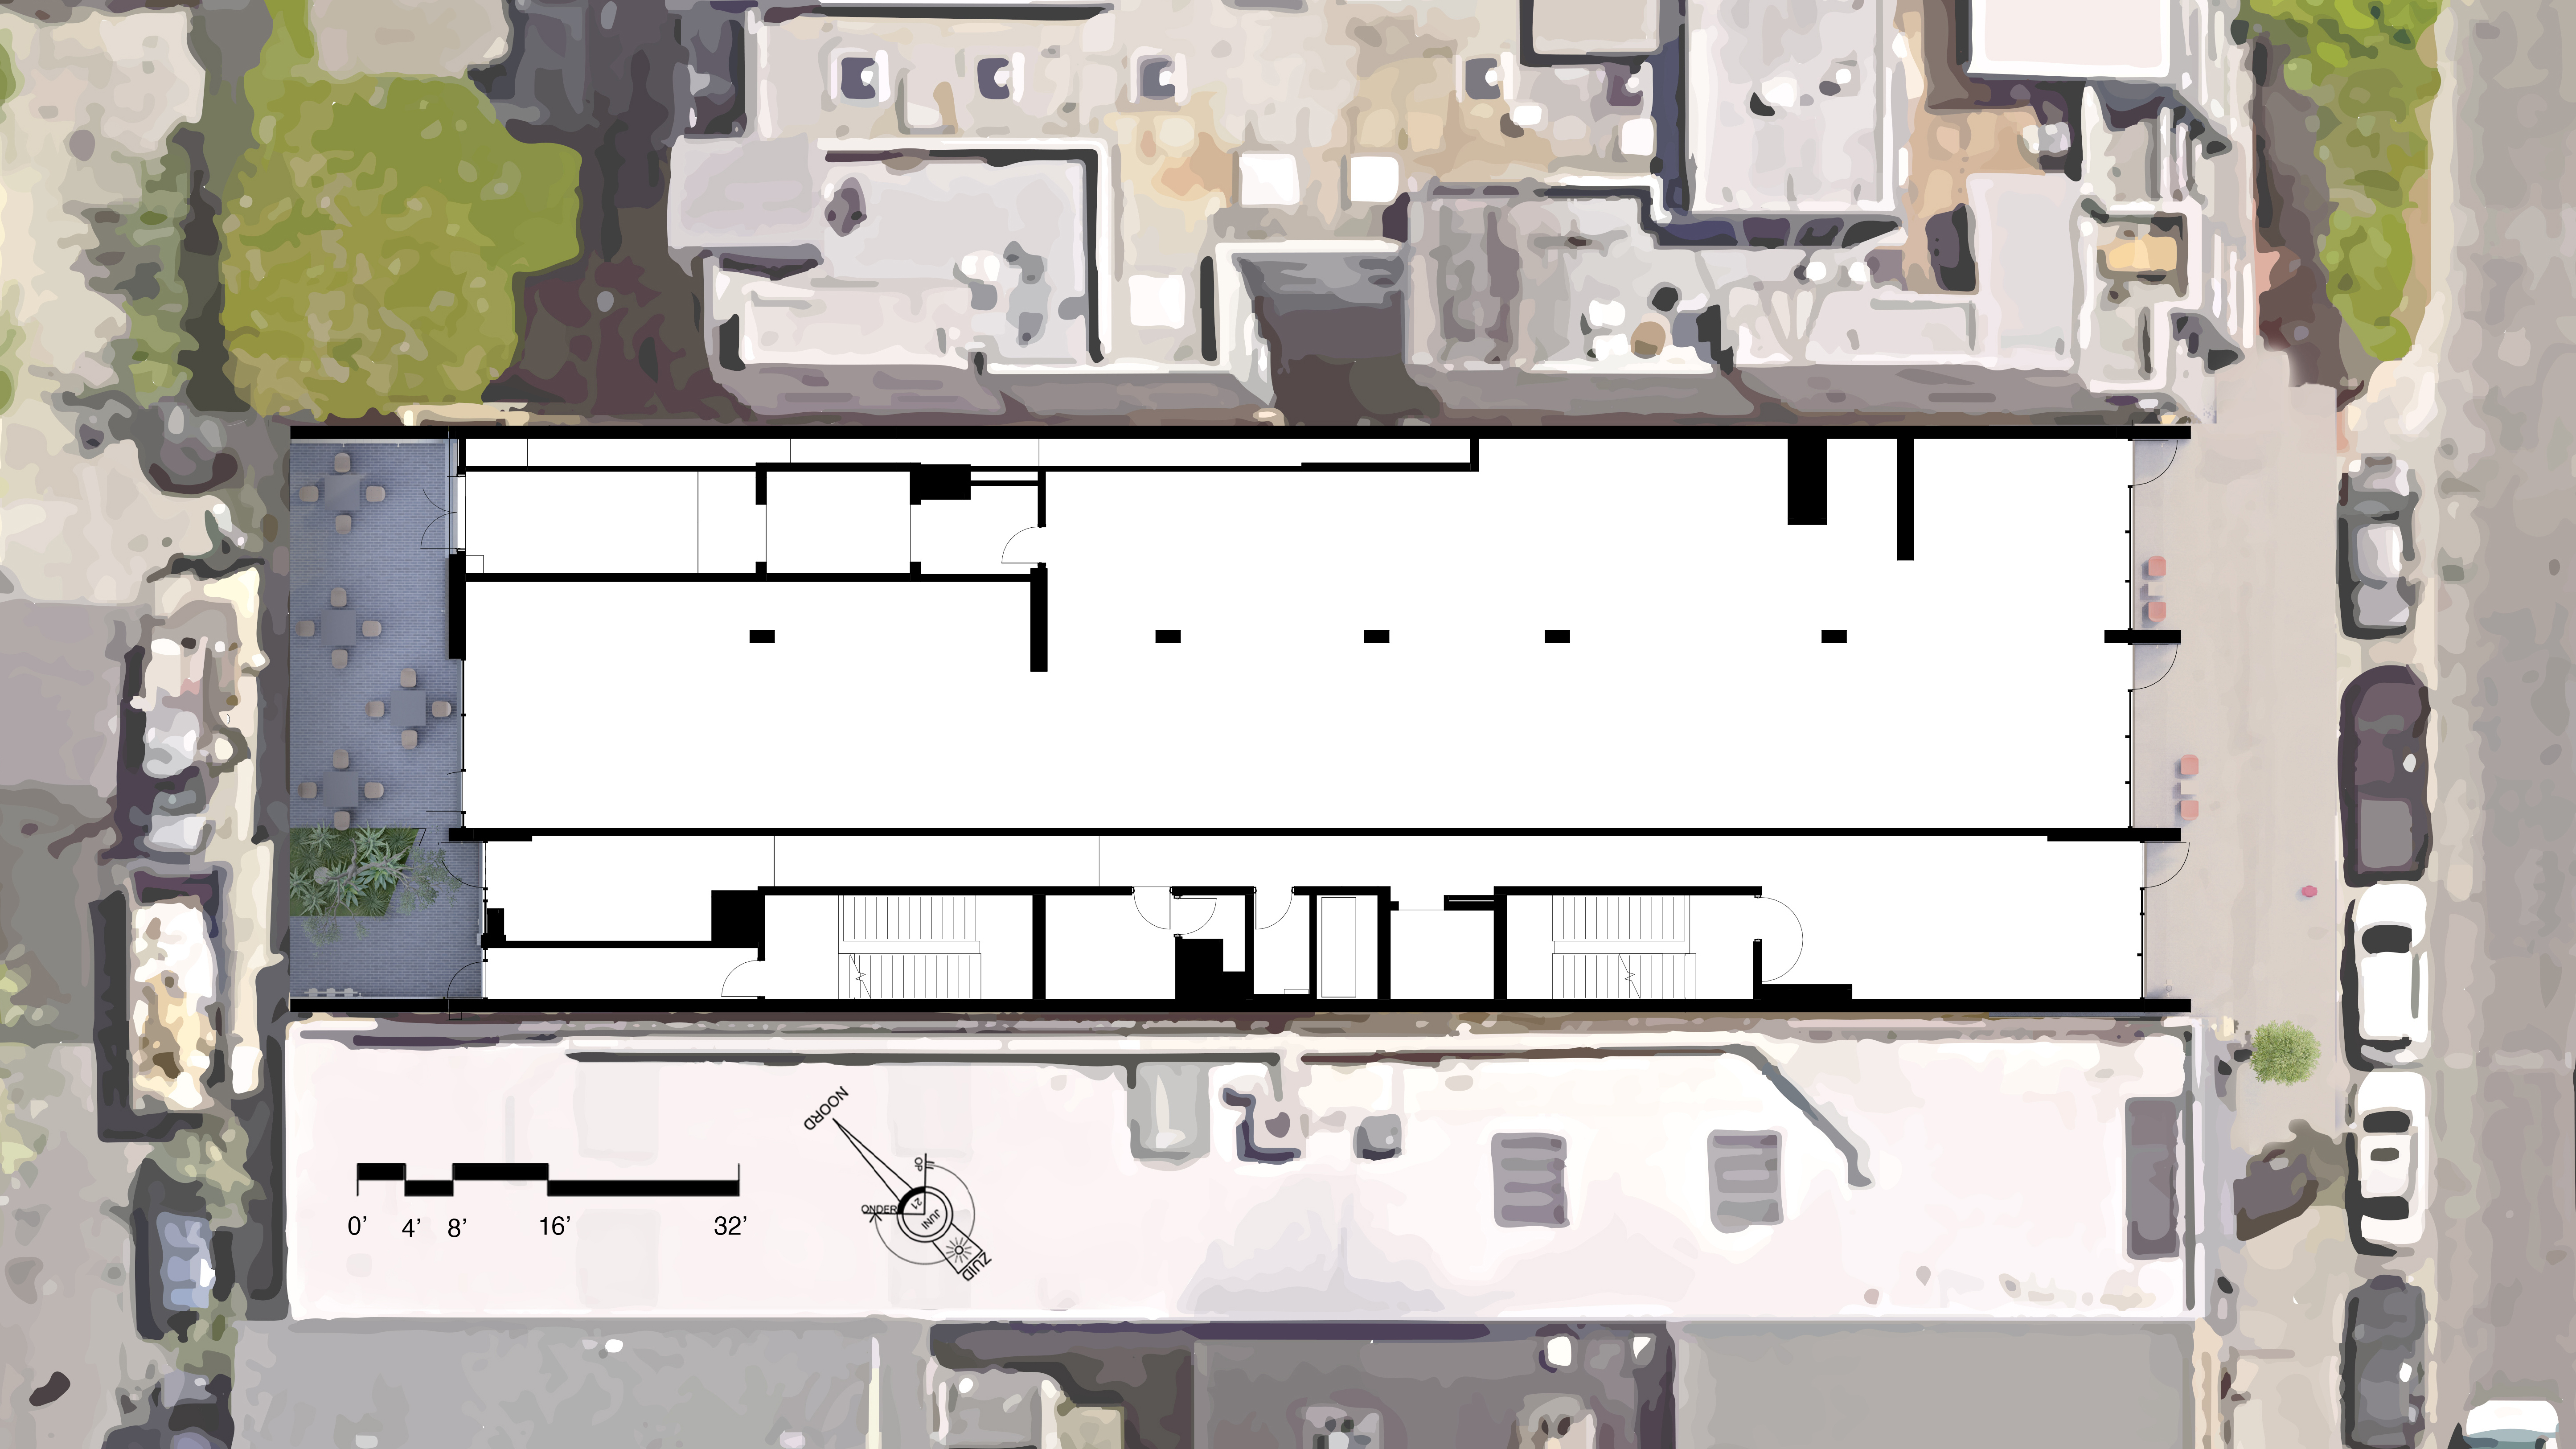 Site plan of OME in San Francisco, CA.